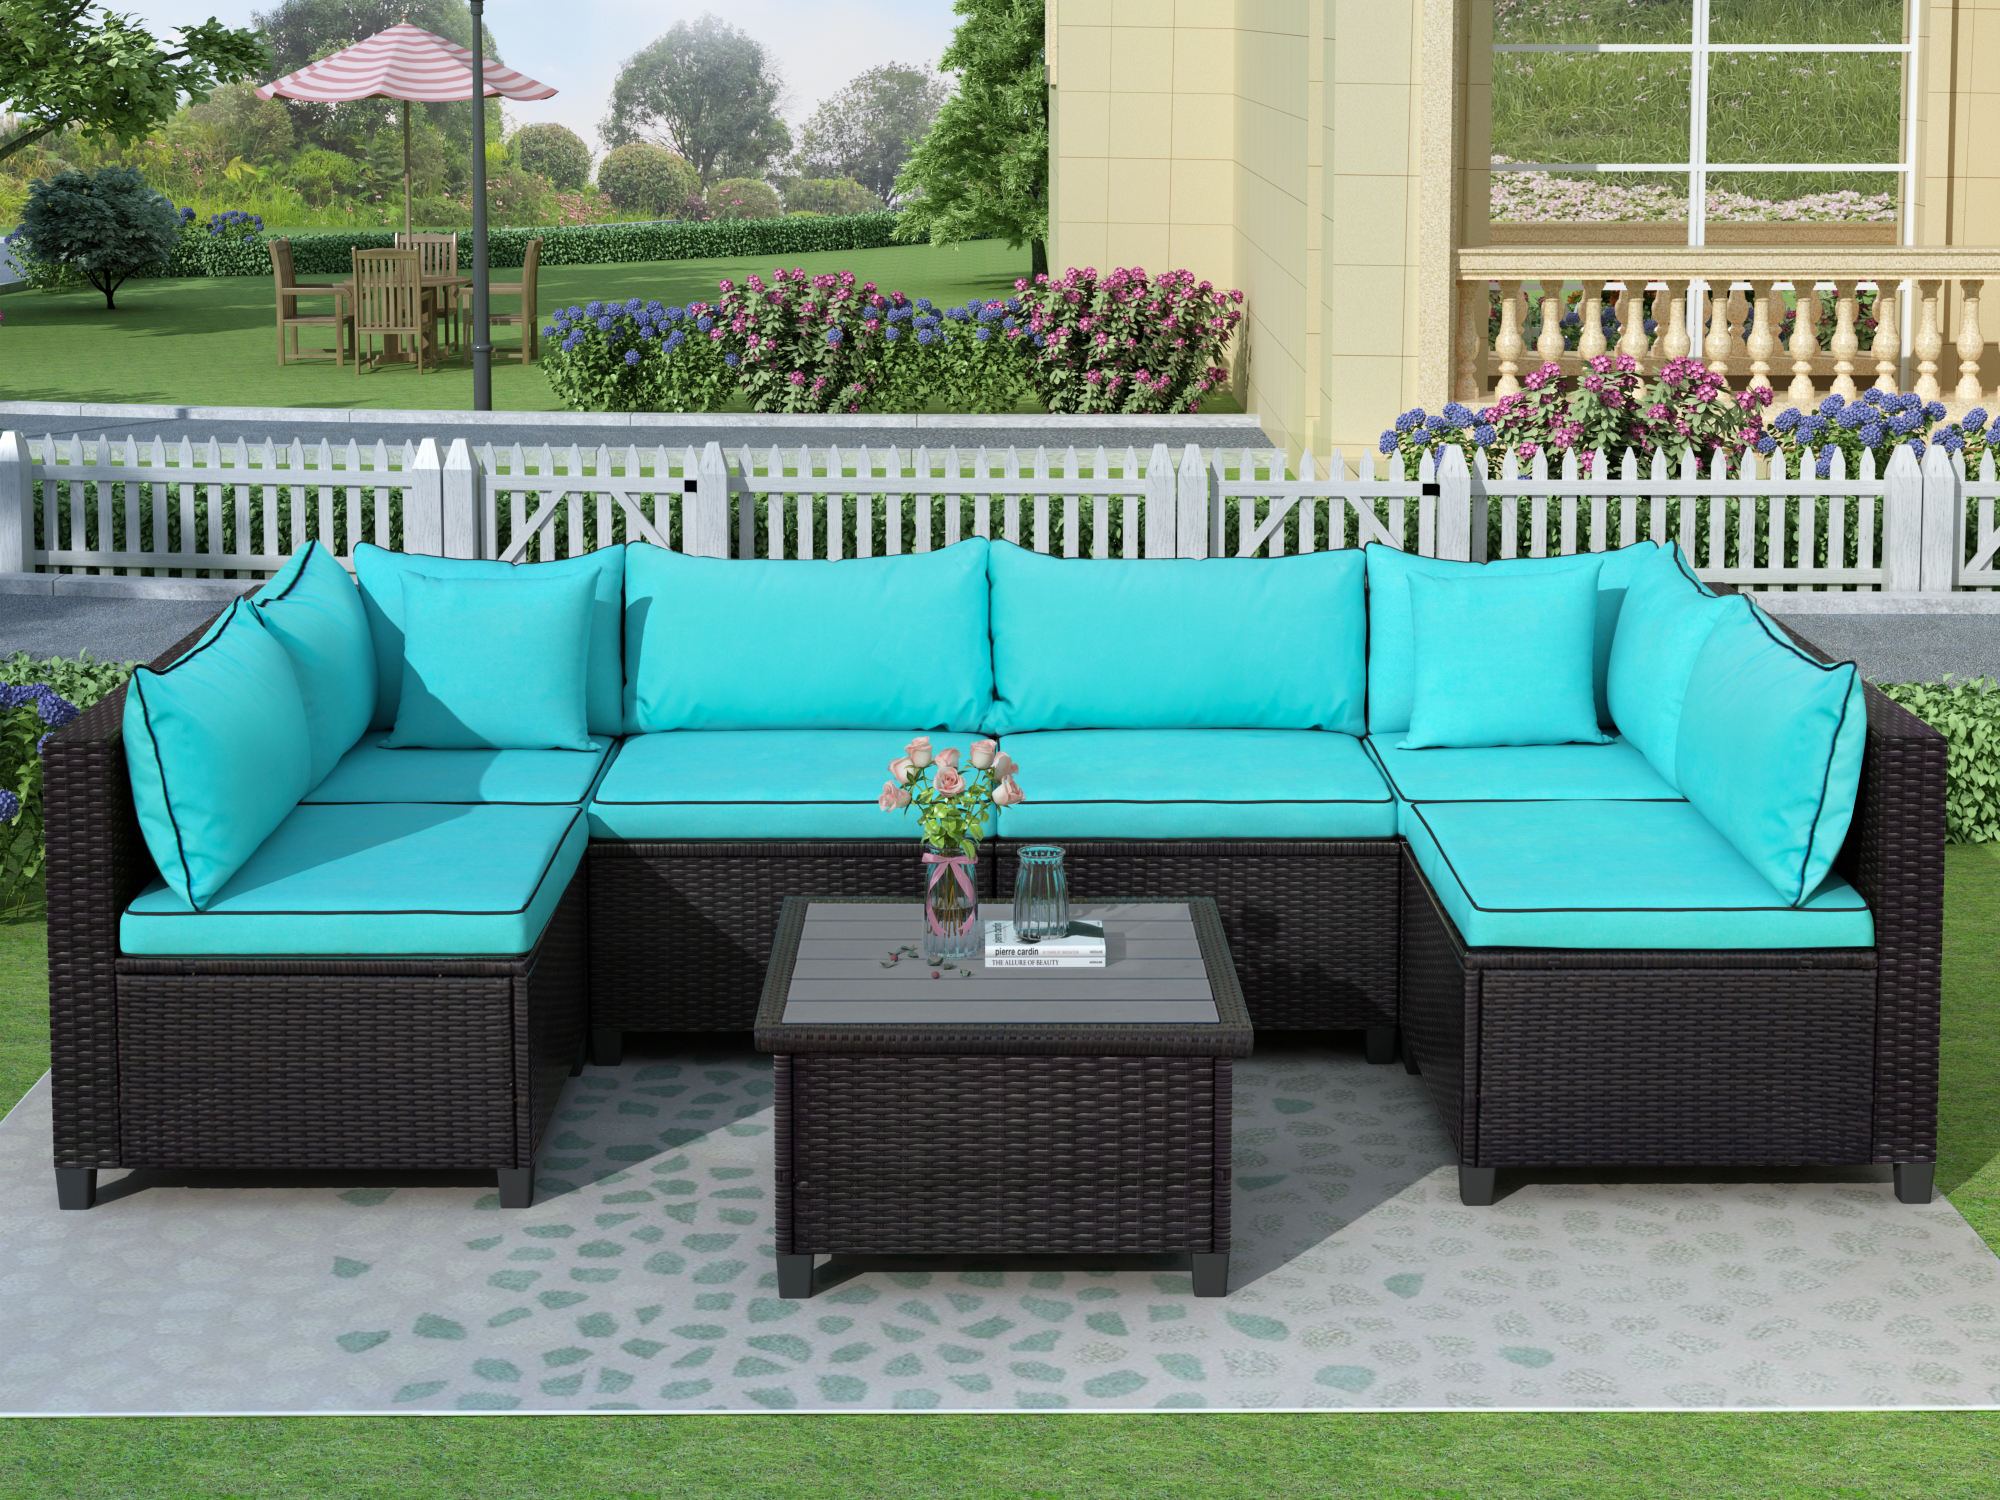 U-style Quality Rattan Wicker Patio Set, U-Shape Sectional Outdoor Furniture Set with Cushions and Accent Pillows-CASAINC